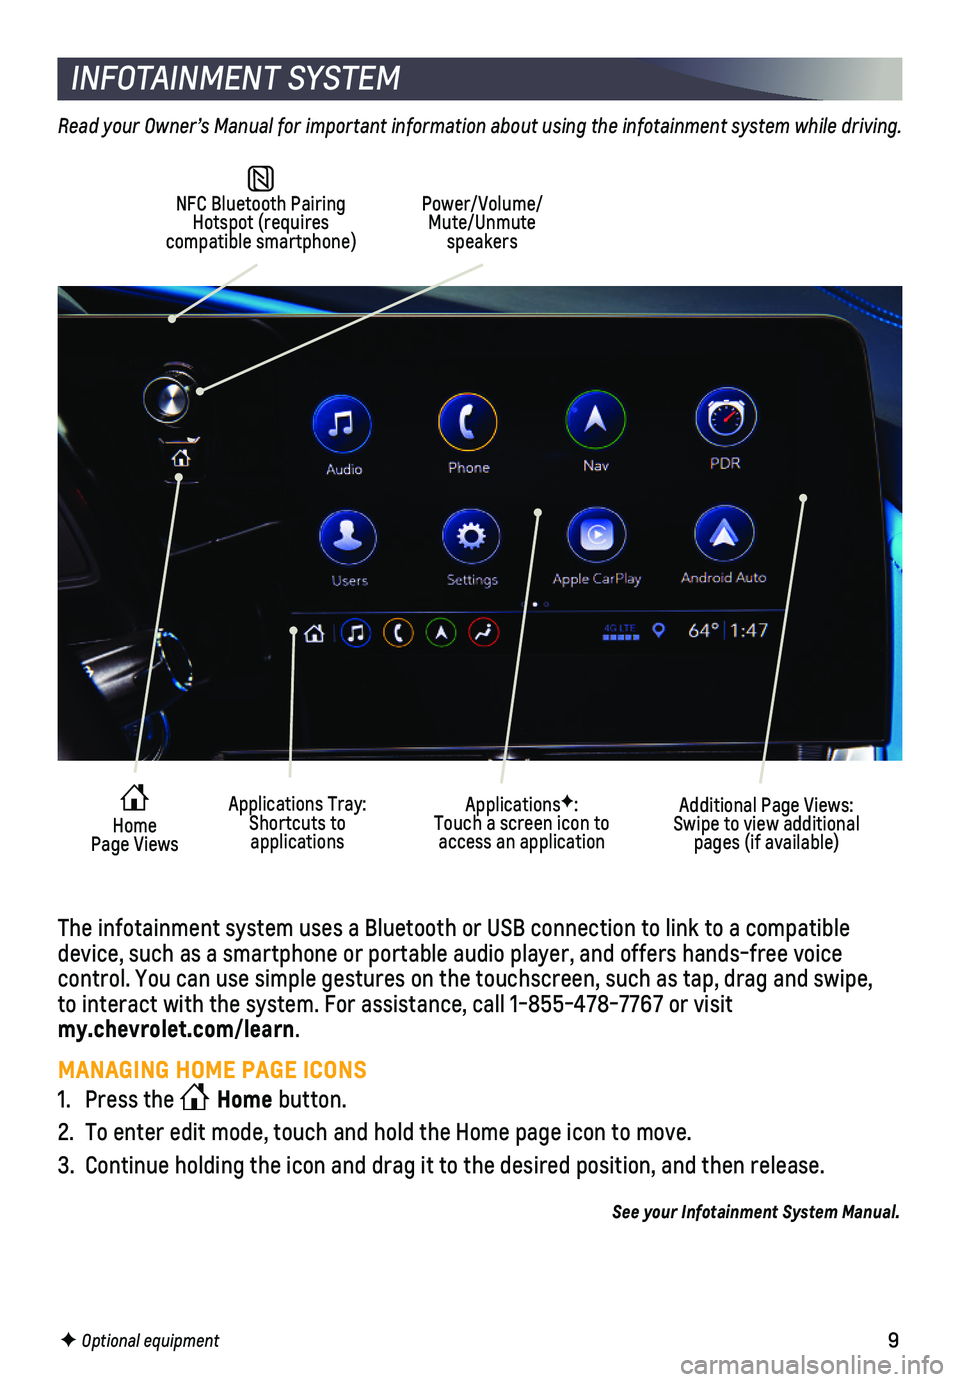 CHEVROLET CORVETTE 2020  Get To Know Guide 9
INFOTAINMENT SYSTEM
F Optional equipment
 NFC Bluetooth Pairing Hotspot (requires compatible smartphone)
Power/Volume/Mute/Unmute speakers
Additional Page Views: Swipe to view additional pages (if a